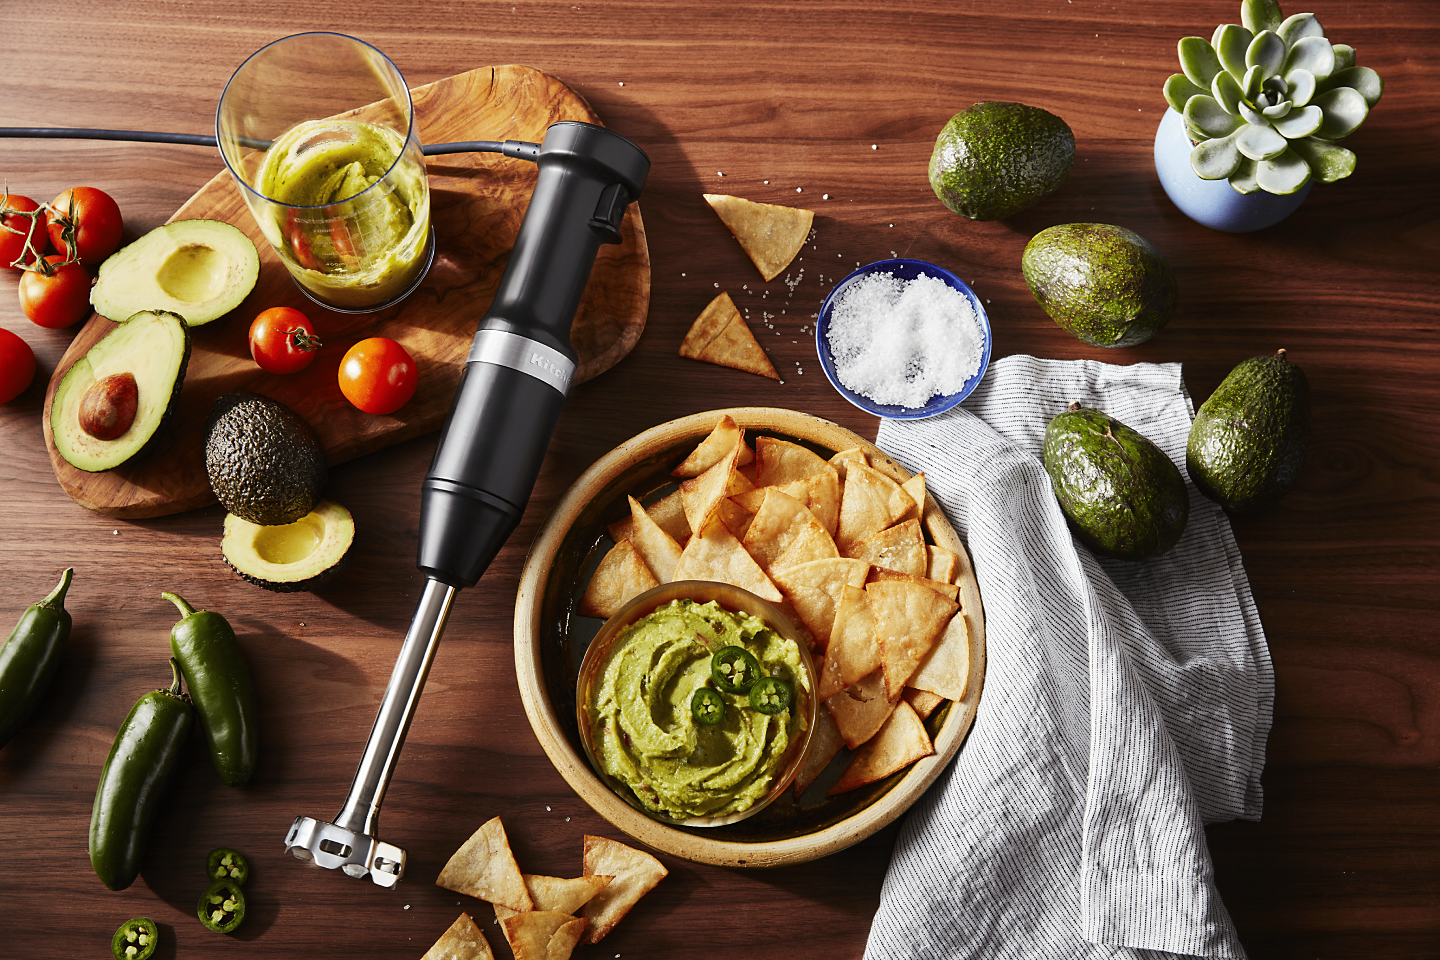 Black KitchenAid® immersion blender on wood surface with guacamole ingredients and blended guacamole with chips